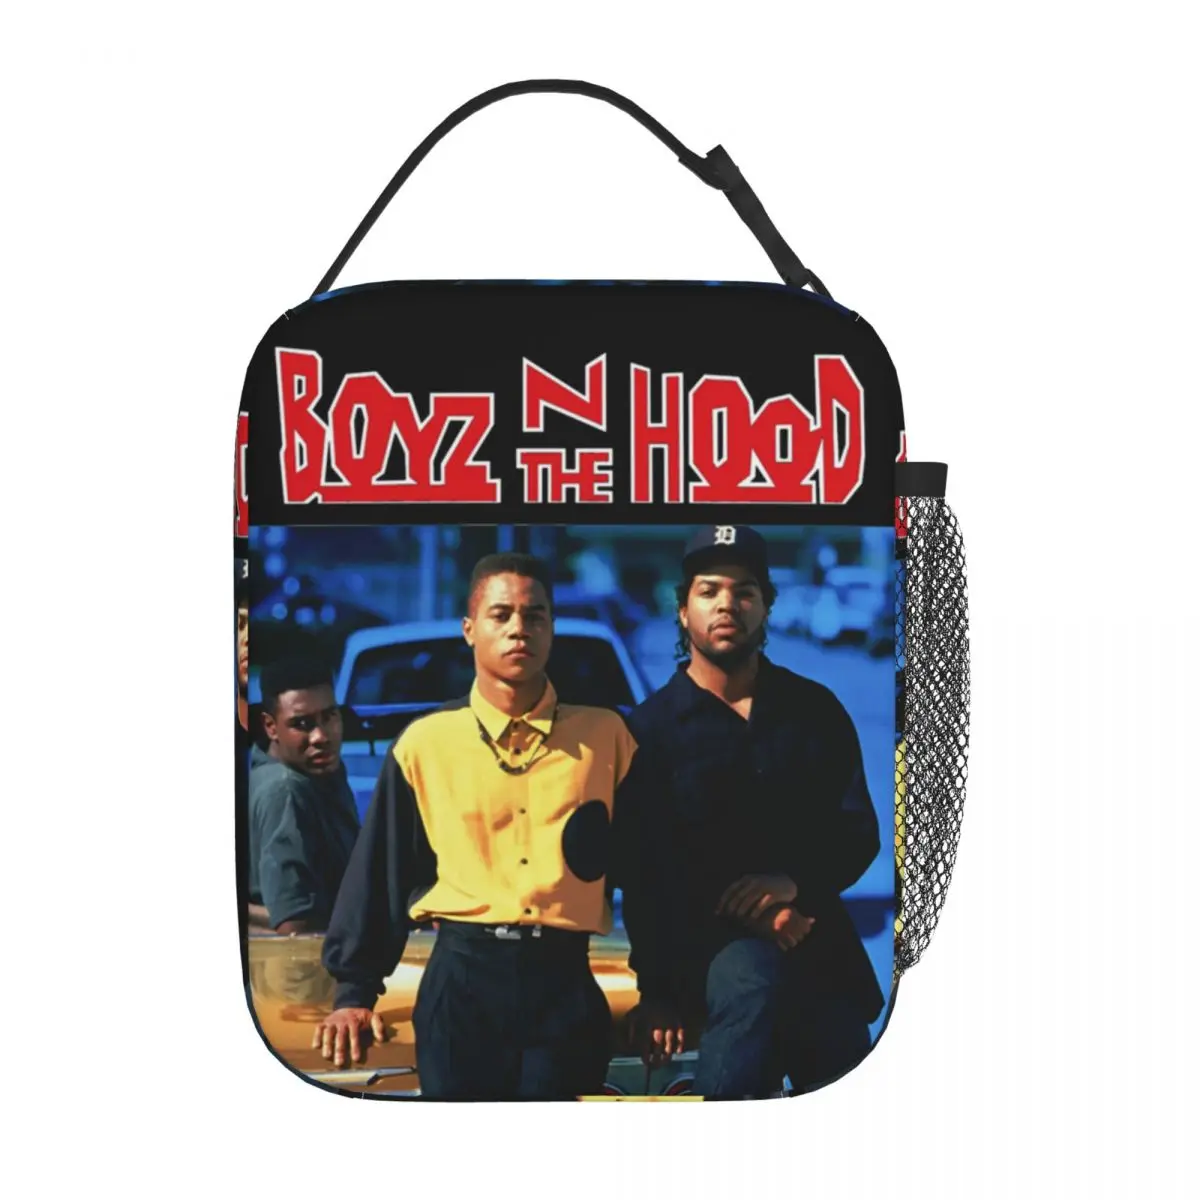 Boyz N The Hood Film Insulated Lunch Bag Food Box Multifunction Thermal Cooler Bento Box Work